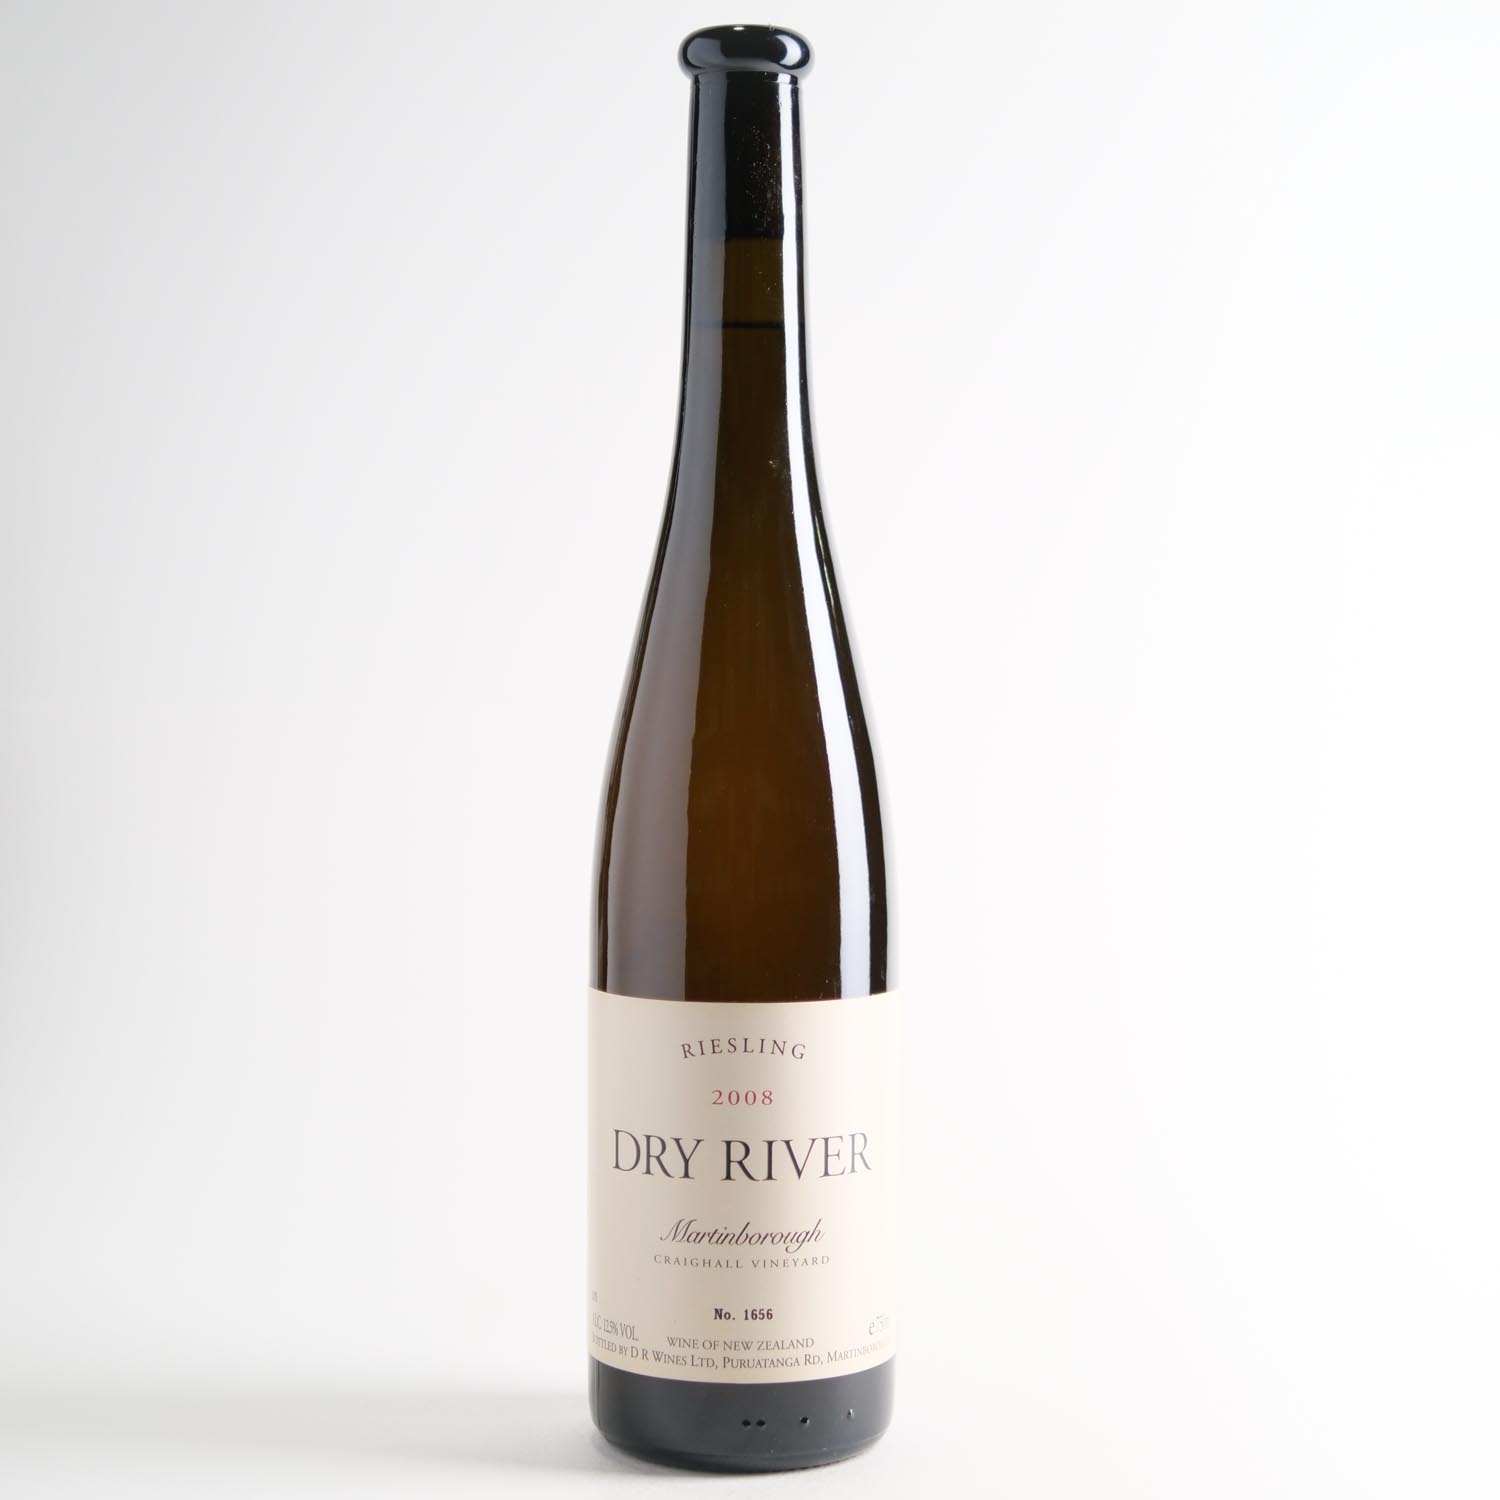 Dry River Craighall Riesling 2008